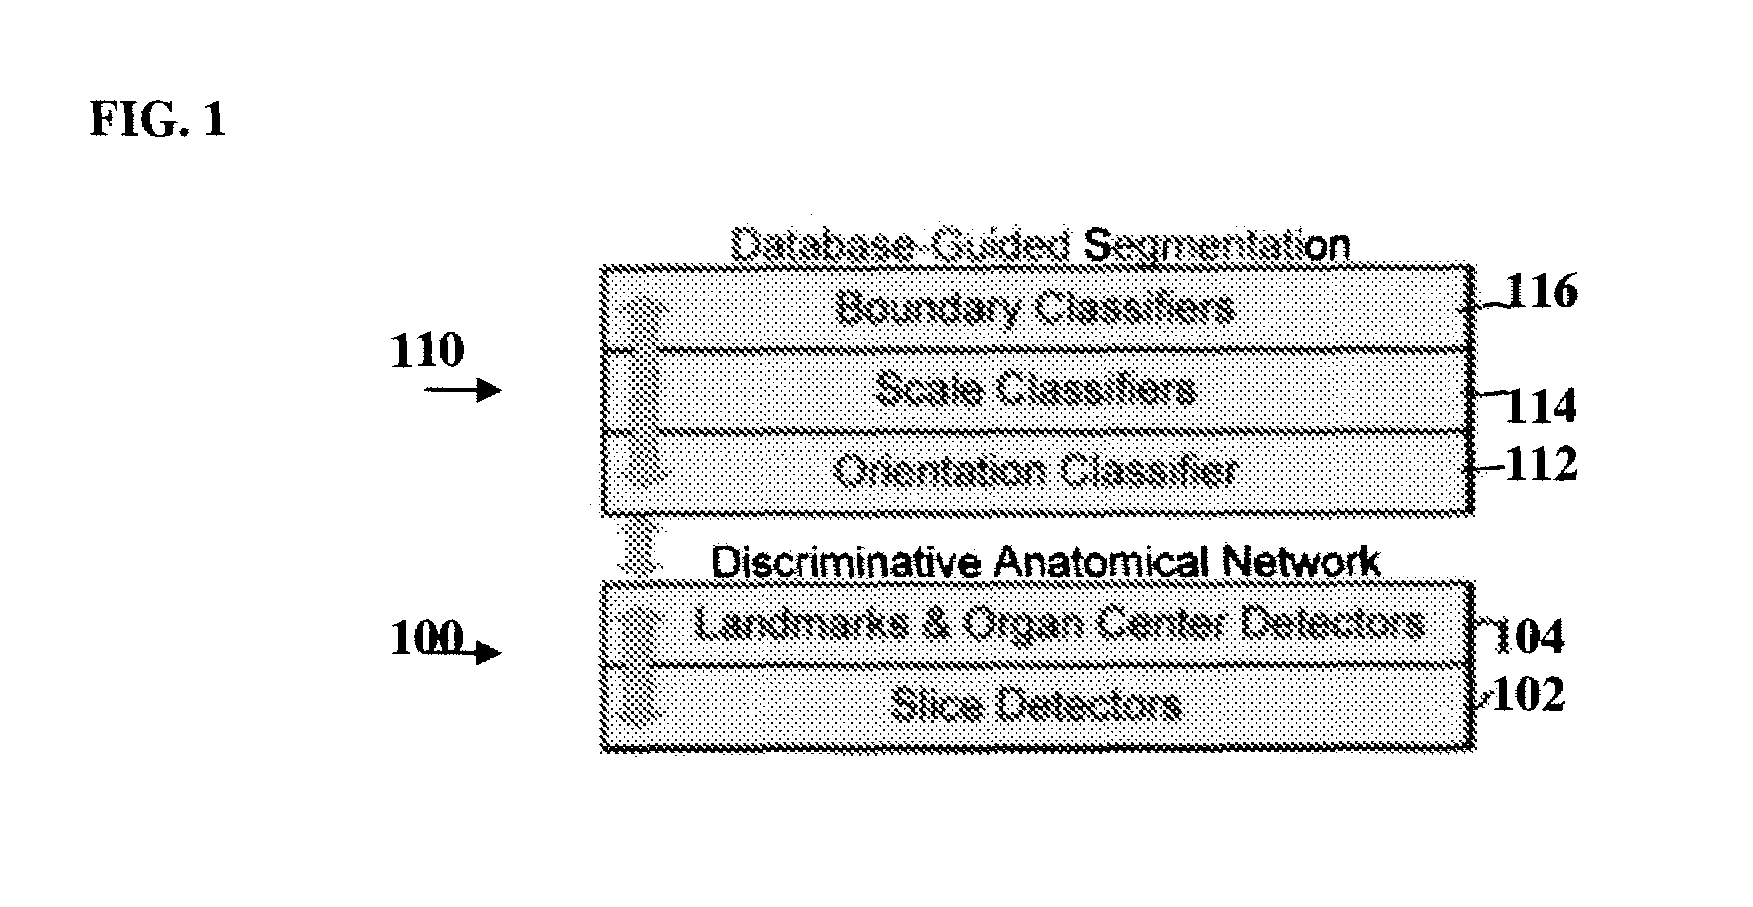 Method and System for Hierarchical Parsing and Semantic Navigation of Full Body Computed Tomography Data